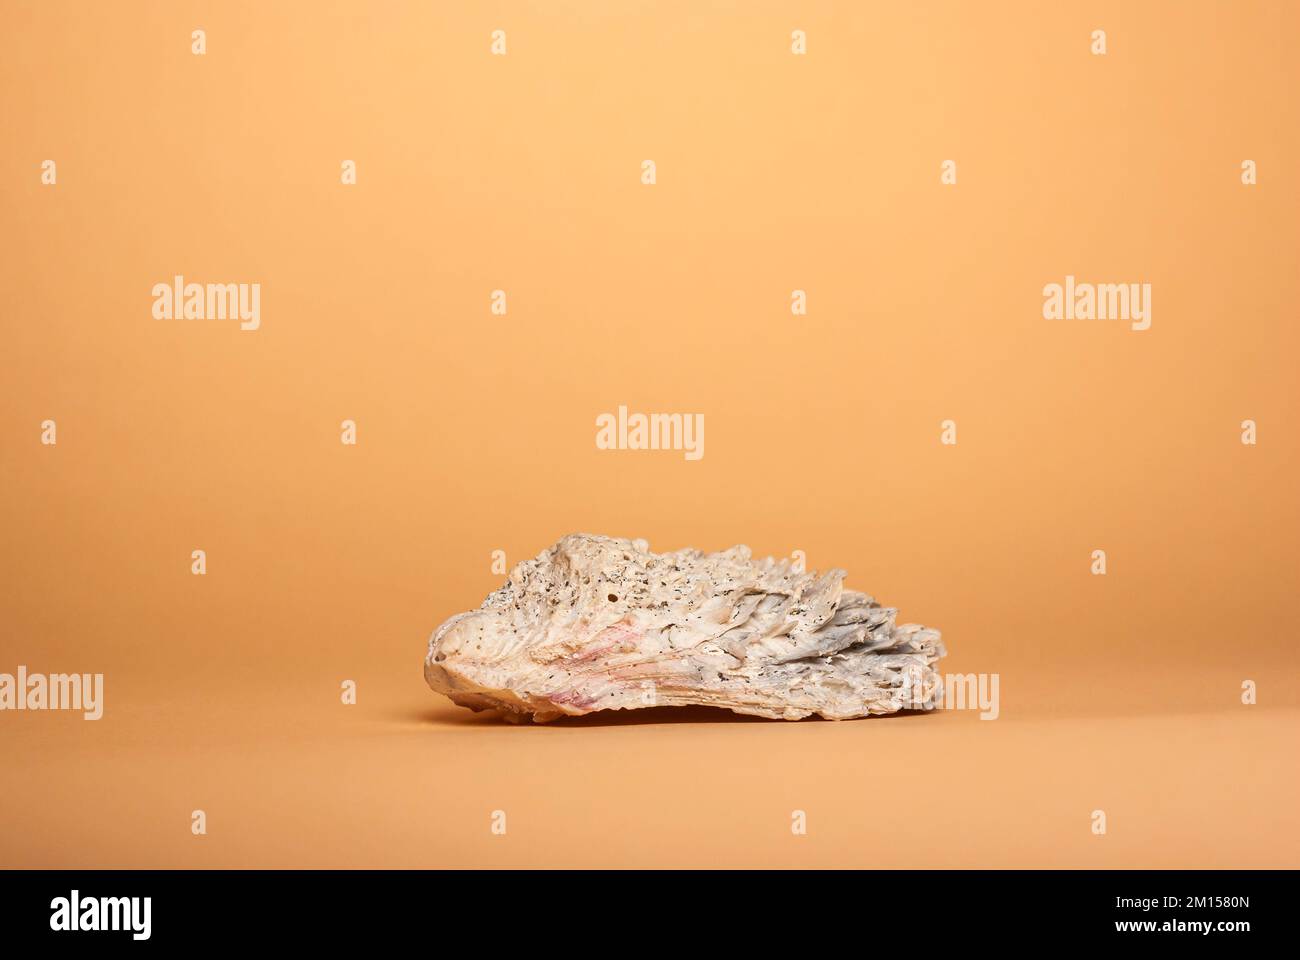 Single oyster shell full of barnacles isolated against a beige background. Stock Photo